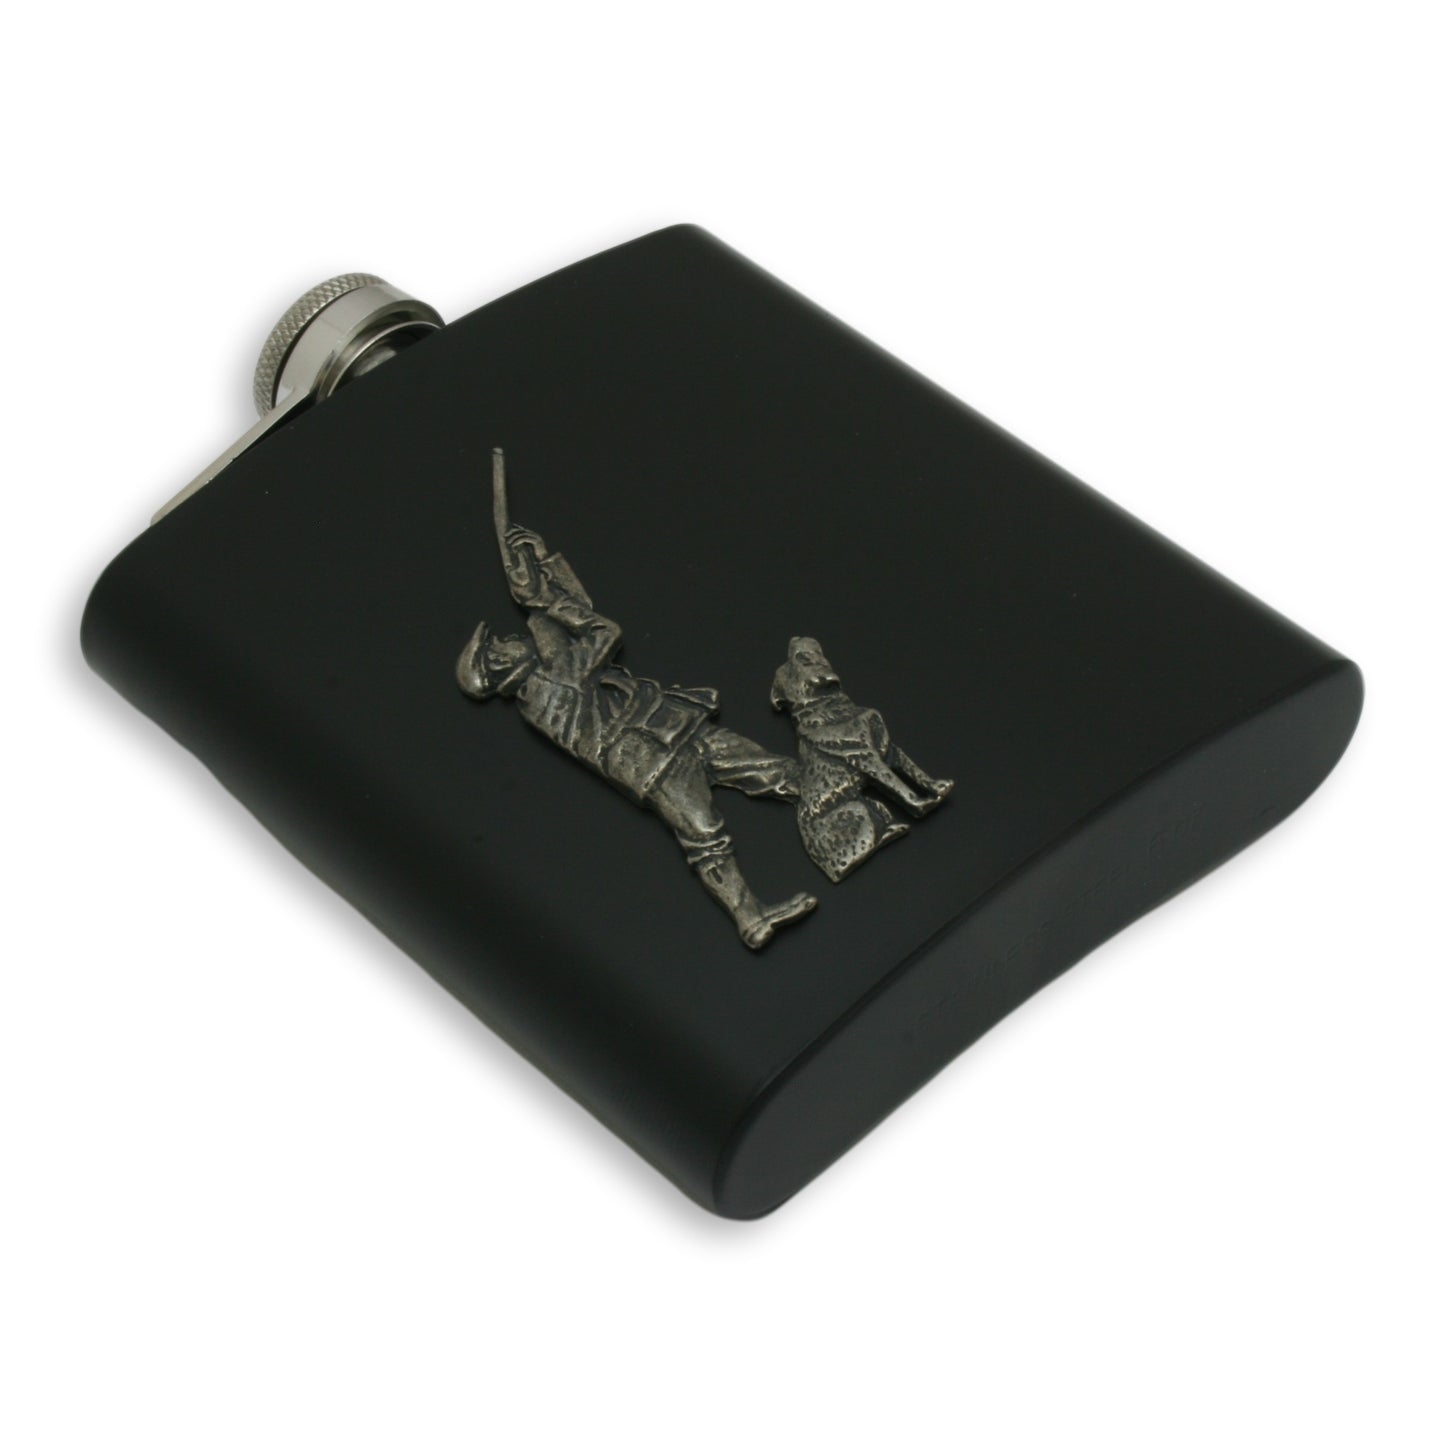 Game Shooter and Gundog Hip Flask 6oz Stainless Steel